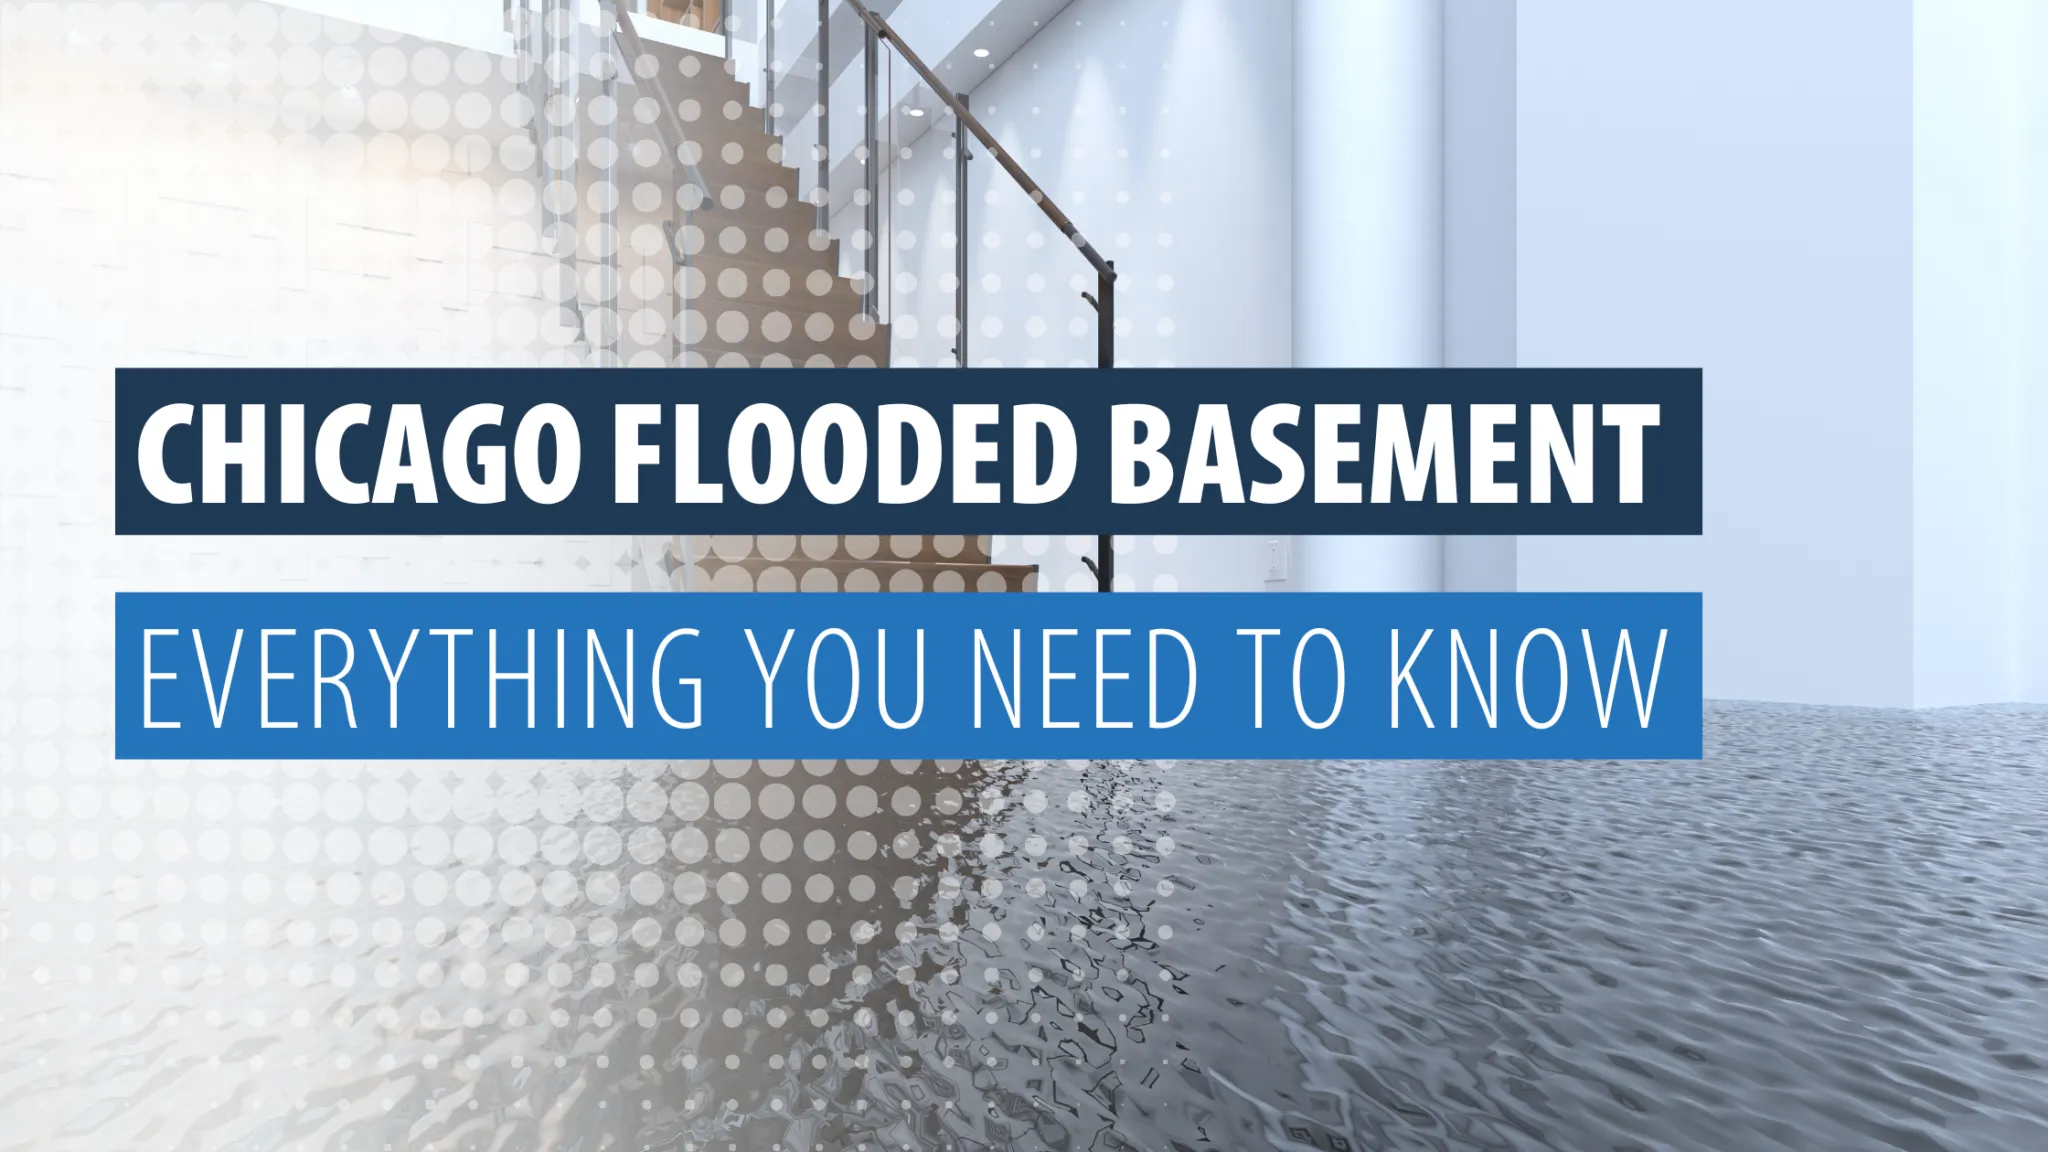 Chicago Flooded Basement: Everything You Need to Know